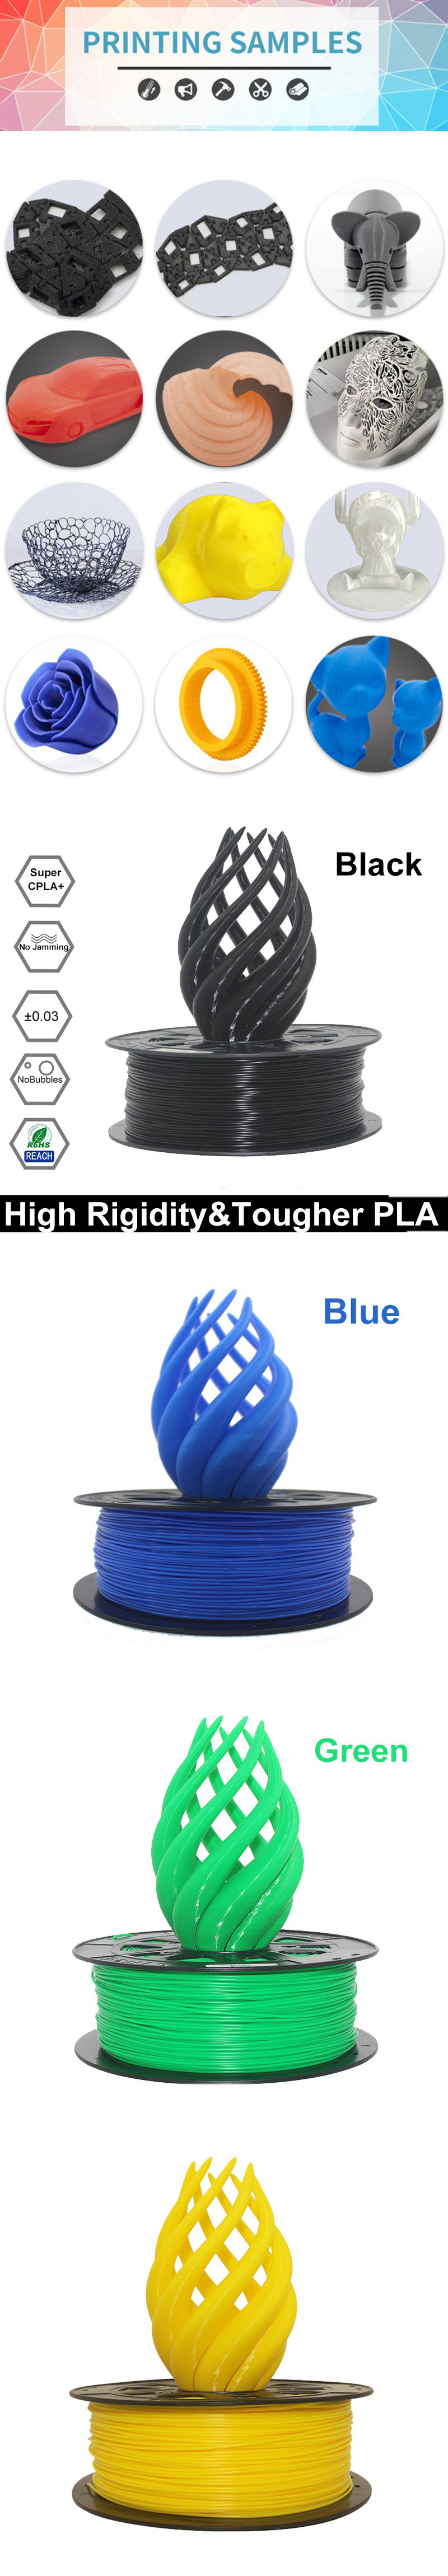 CCTREE® 1.75mm 1KG/Roll 3D Printer ST-PLA Filament For Creality CR-10/Ender-3 14